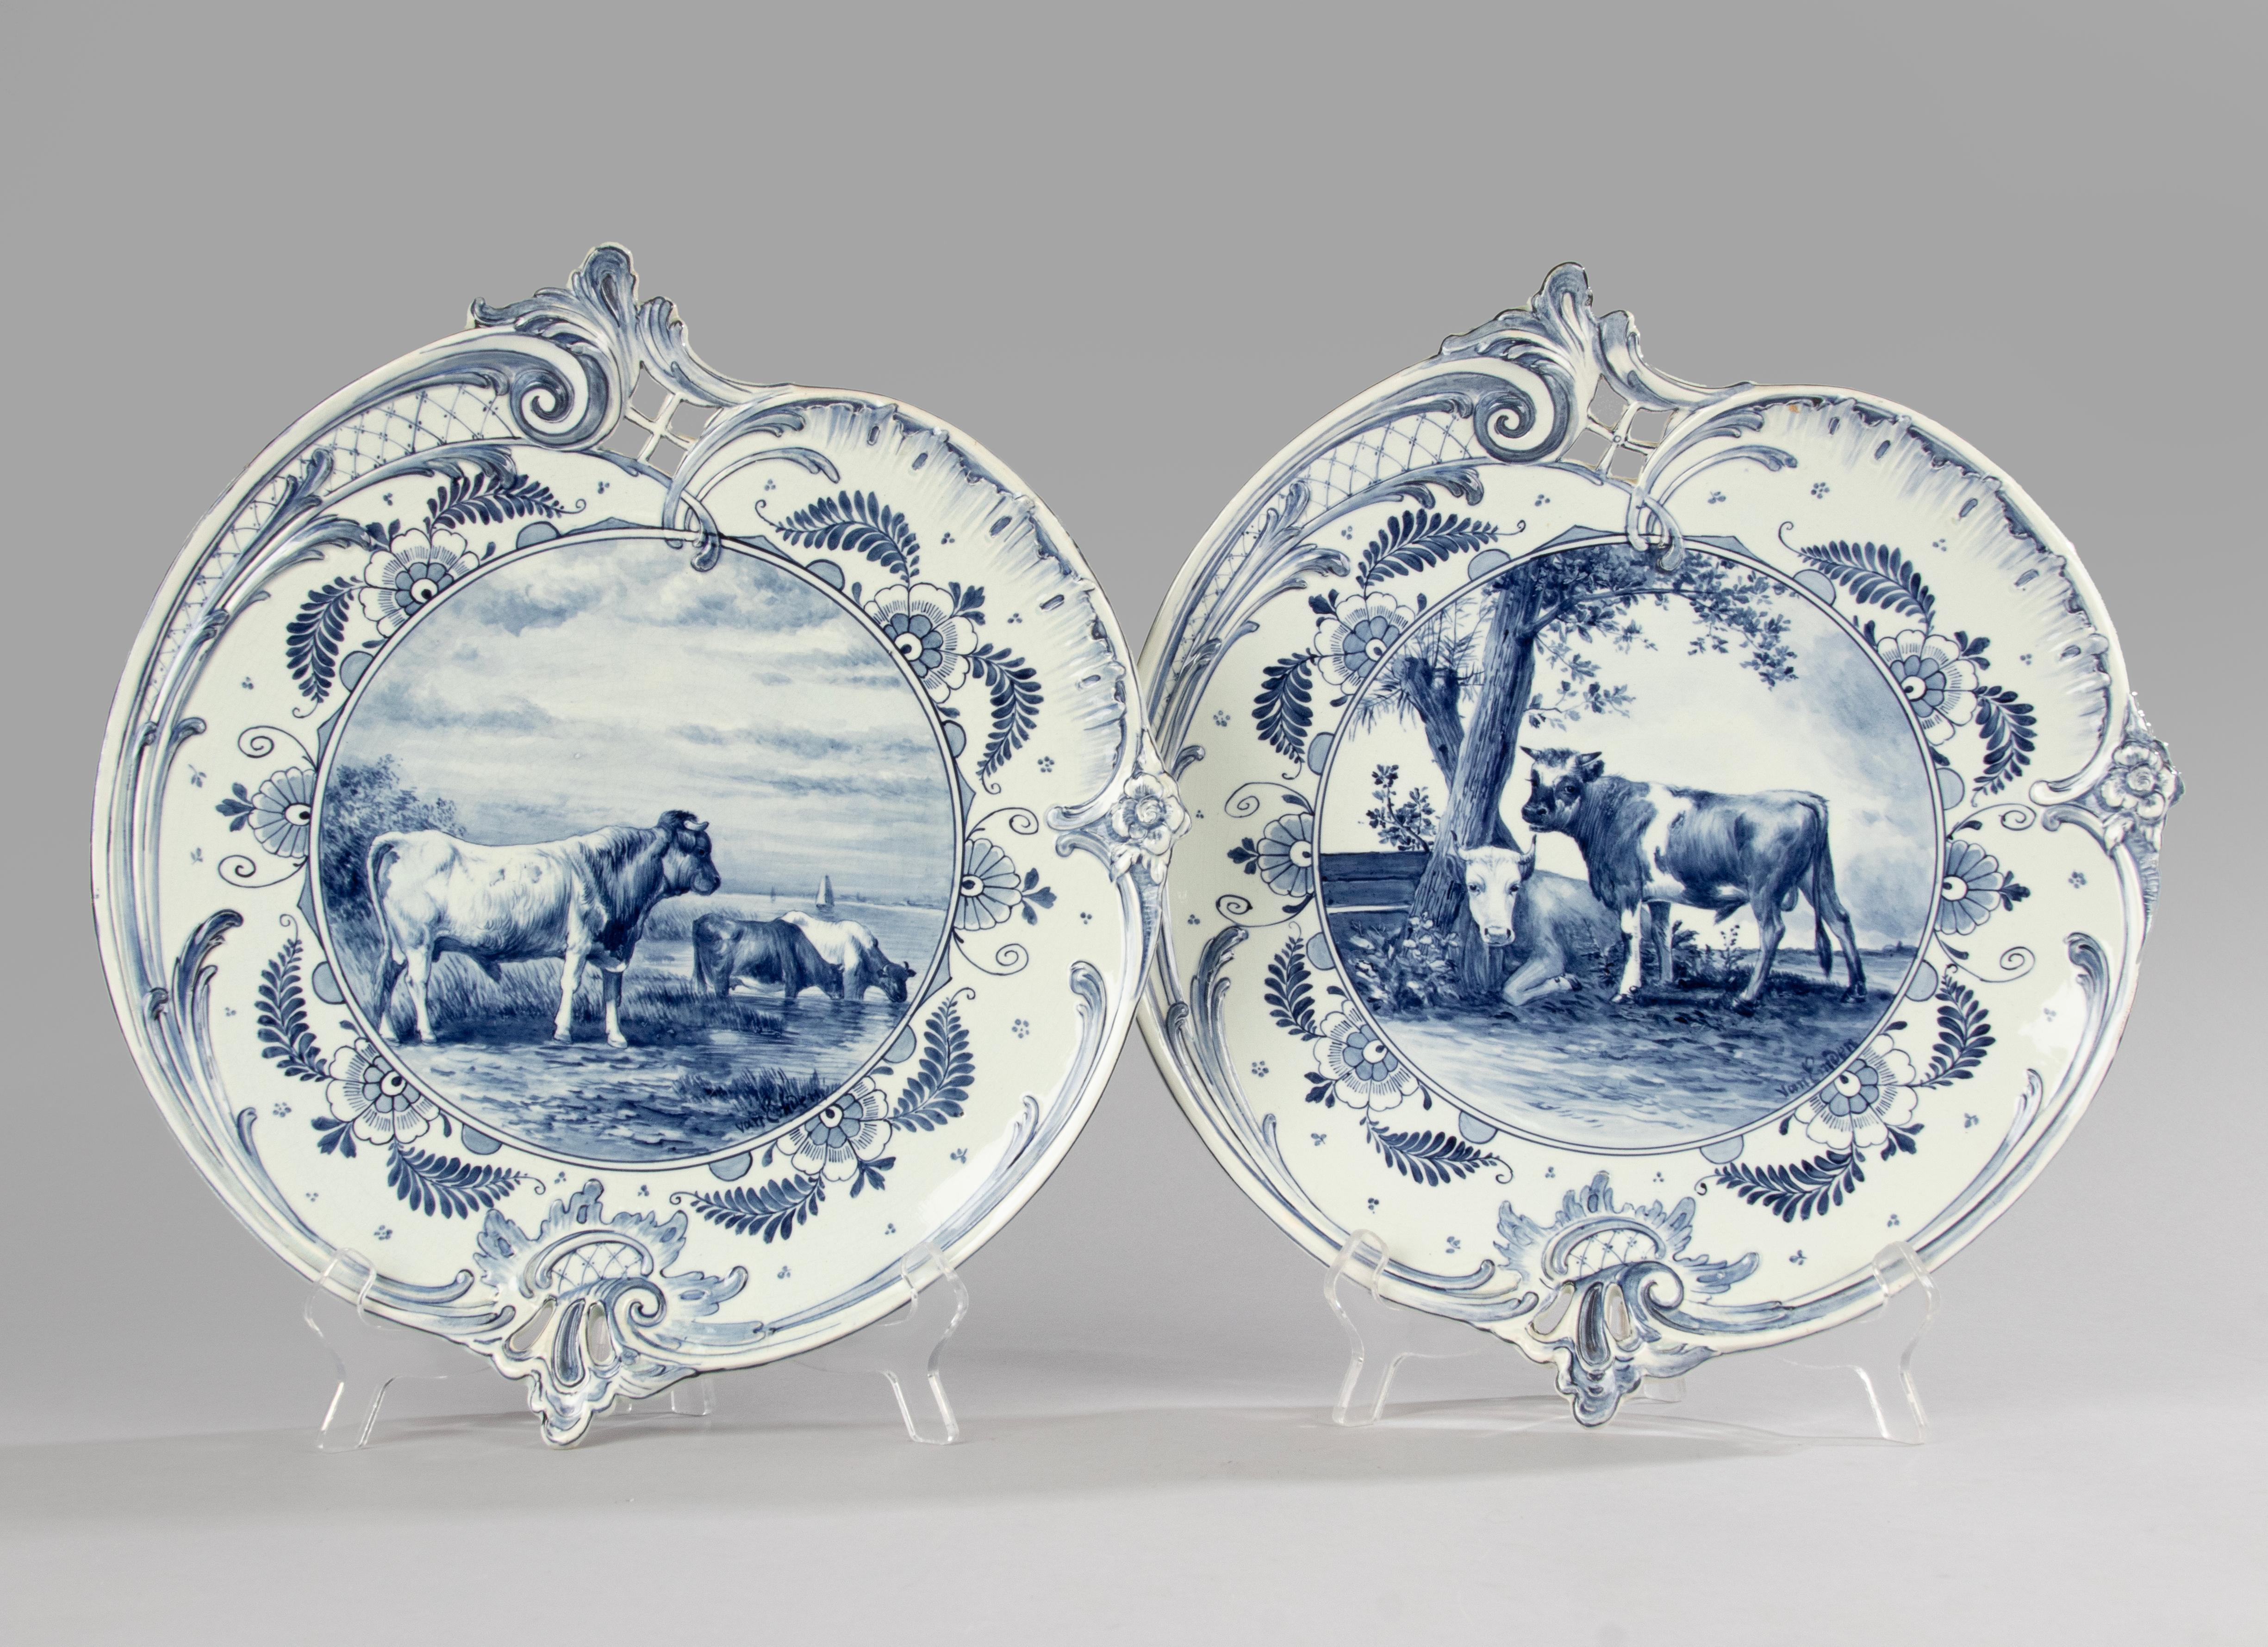 A beautiful pair of large ceramic Delft wall plates. Decorated with romantic landscape scenes with cows. 
The plates are marked on the back 'Royal Bonn', 
The 'Royal Bonn' brand was used between 1890 and 1919 by the factory of Franz Anton Mehlem in